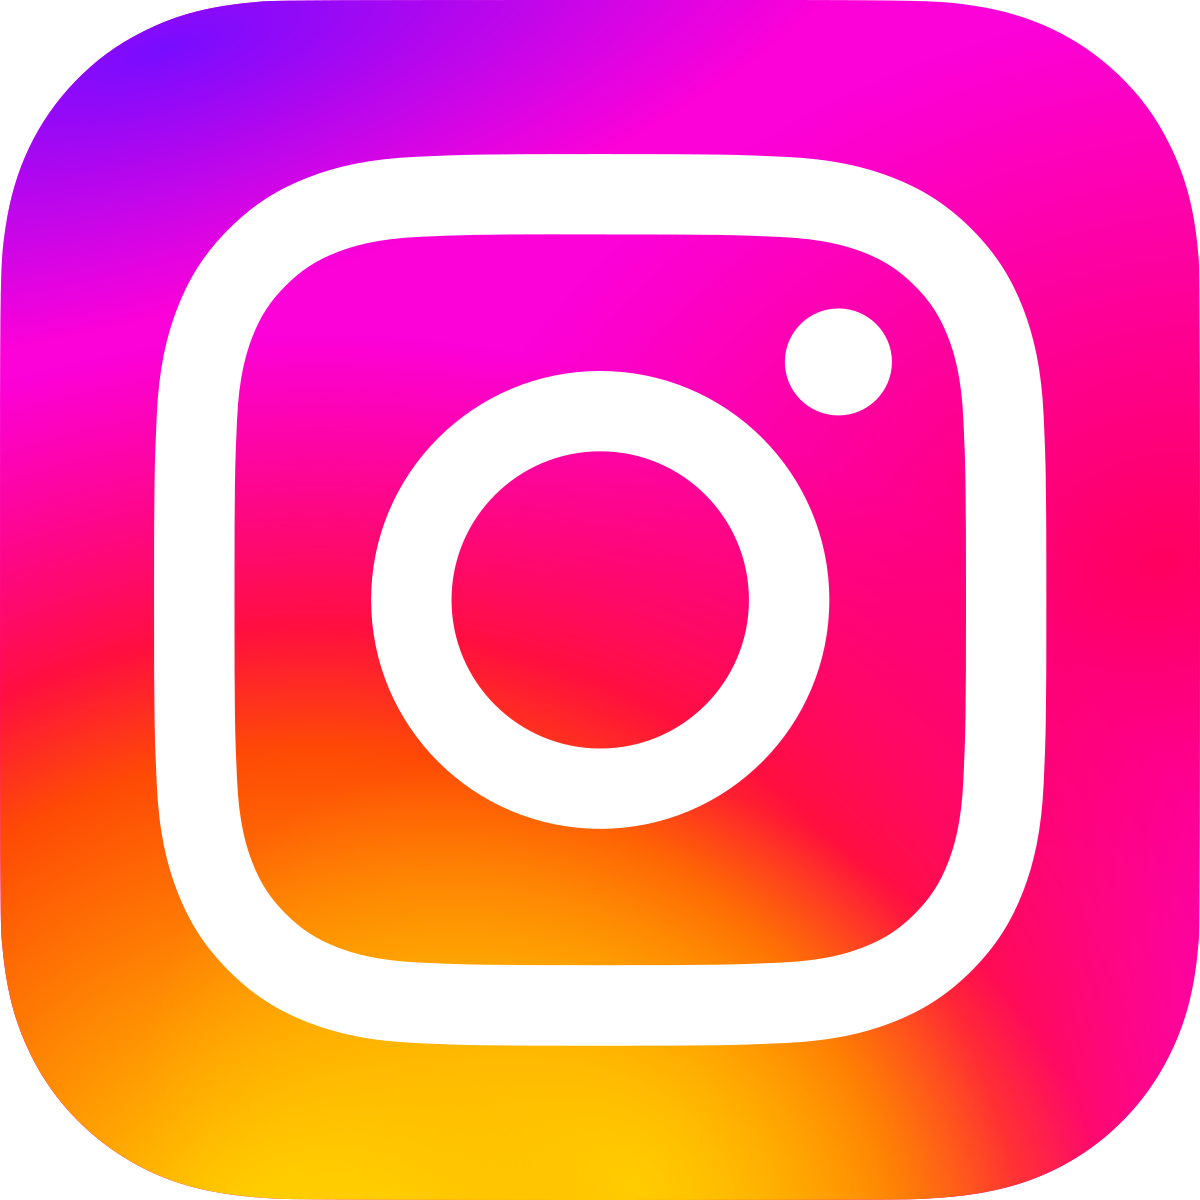 A picture of the instagram logo on a colorful background.